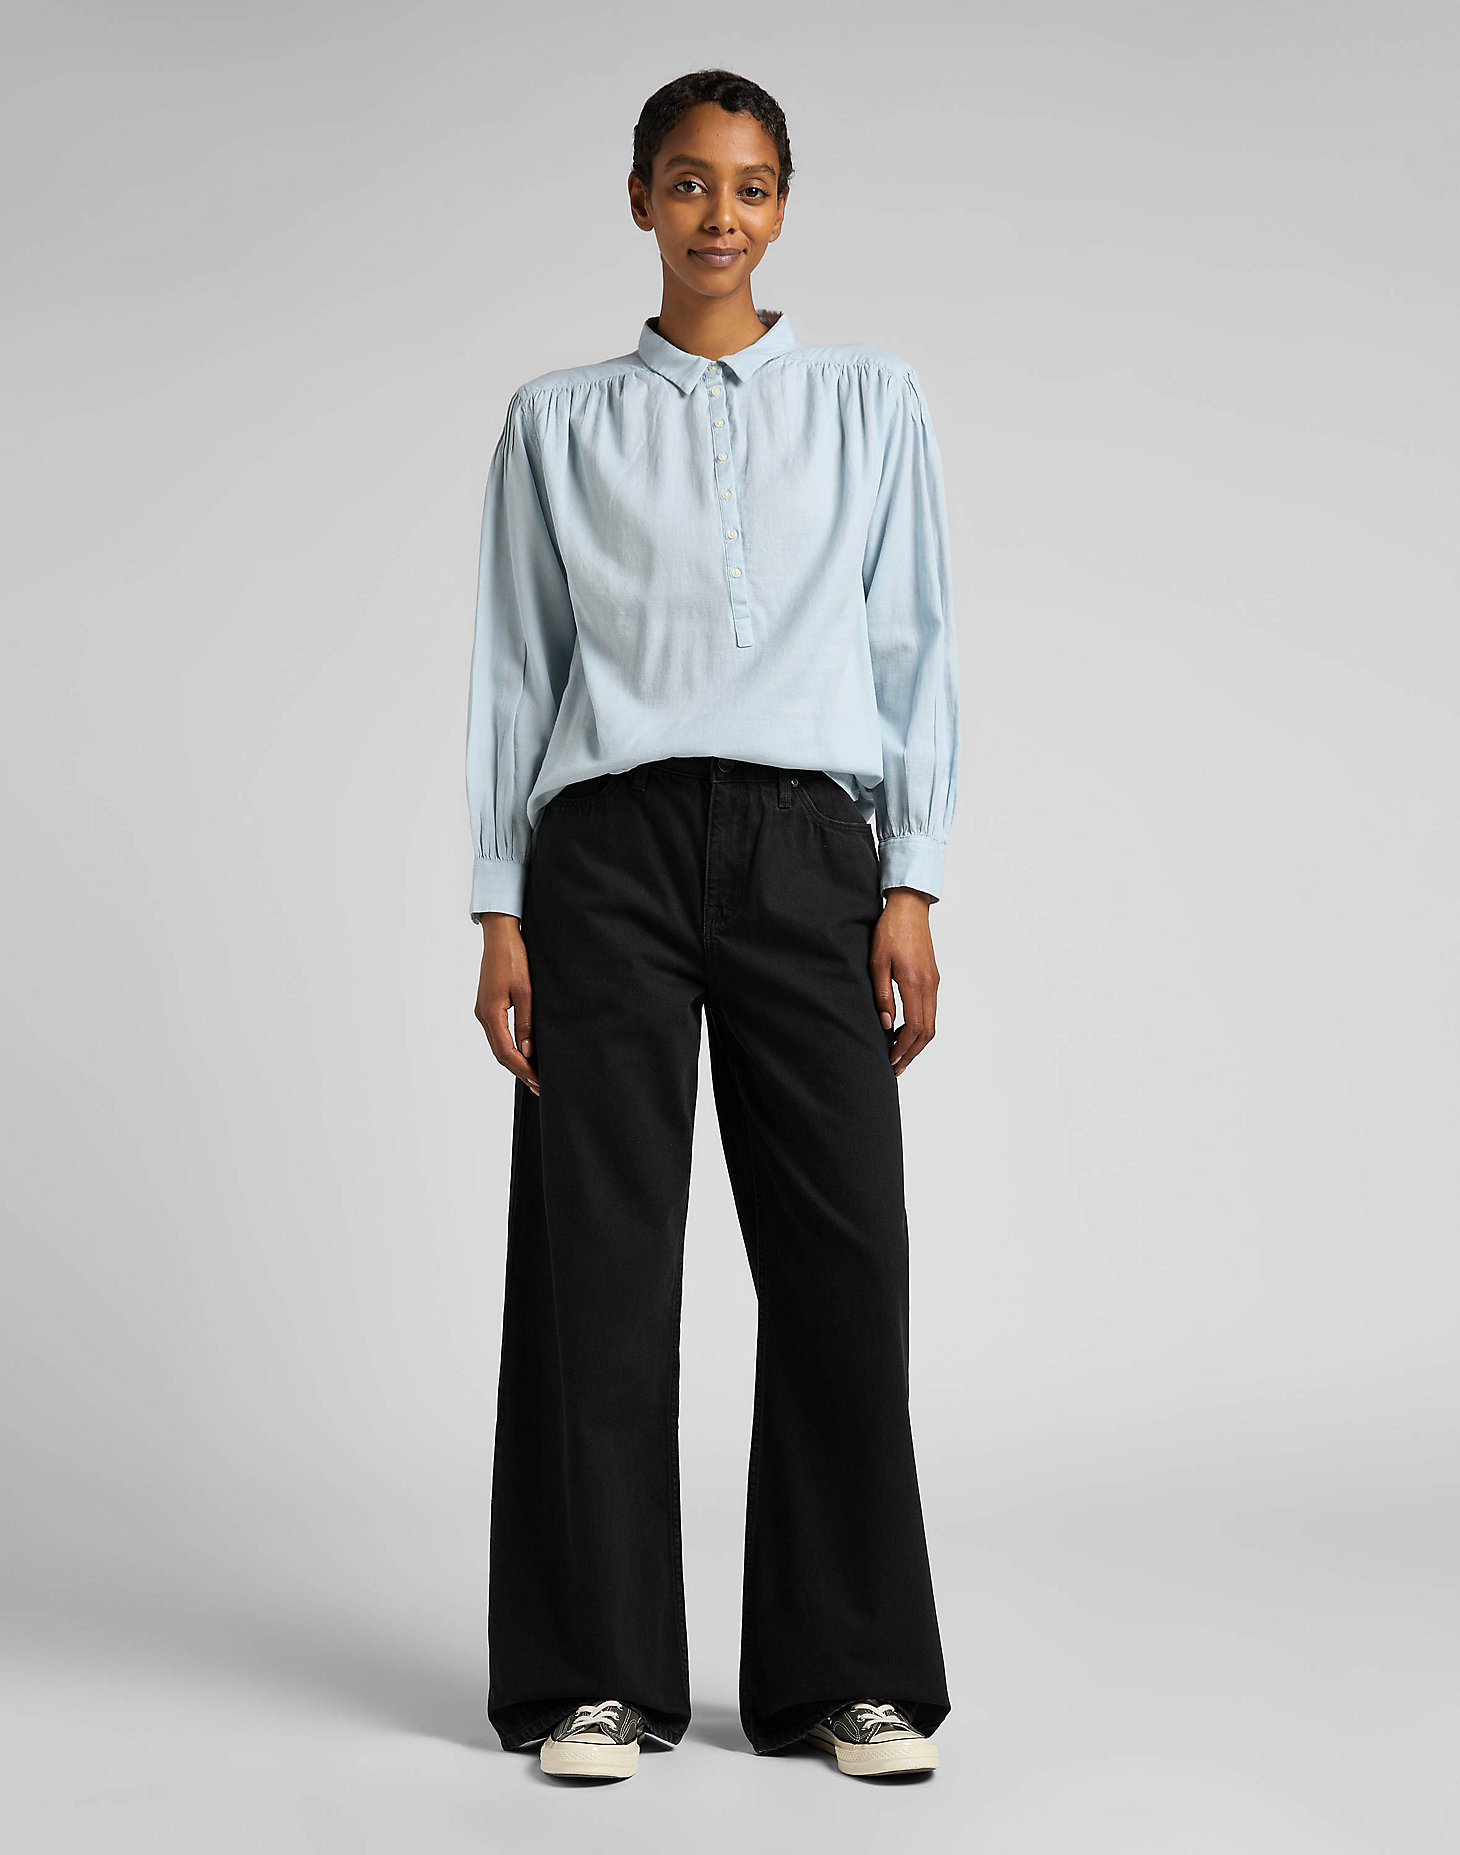 Pintucked Relaxed Blouse in Shy Blue alternative view 2